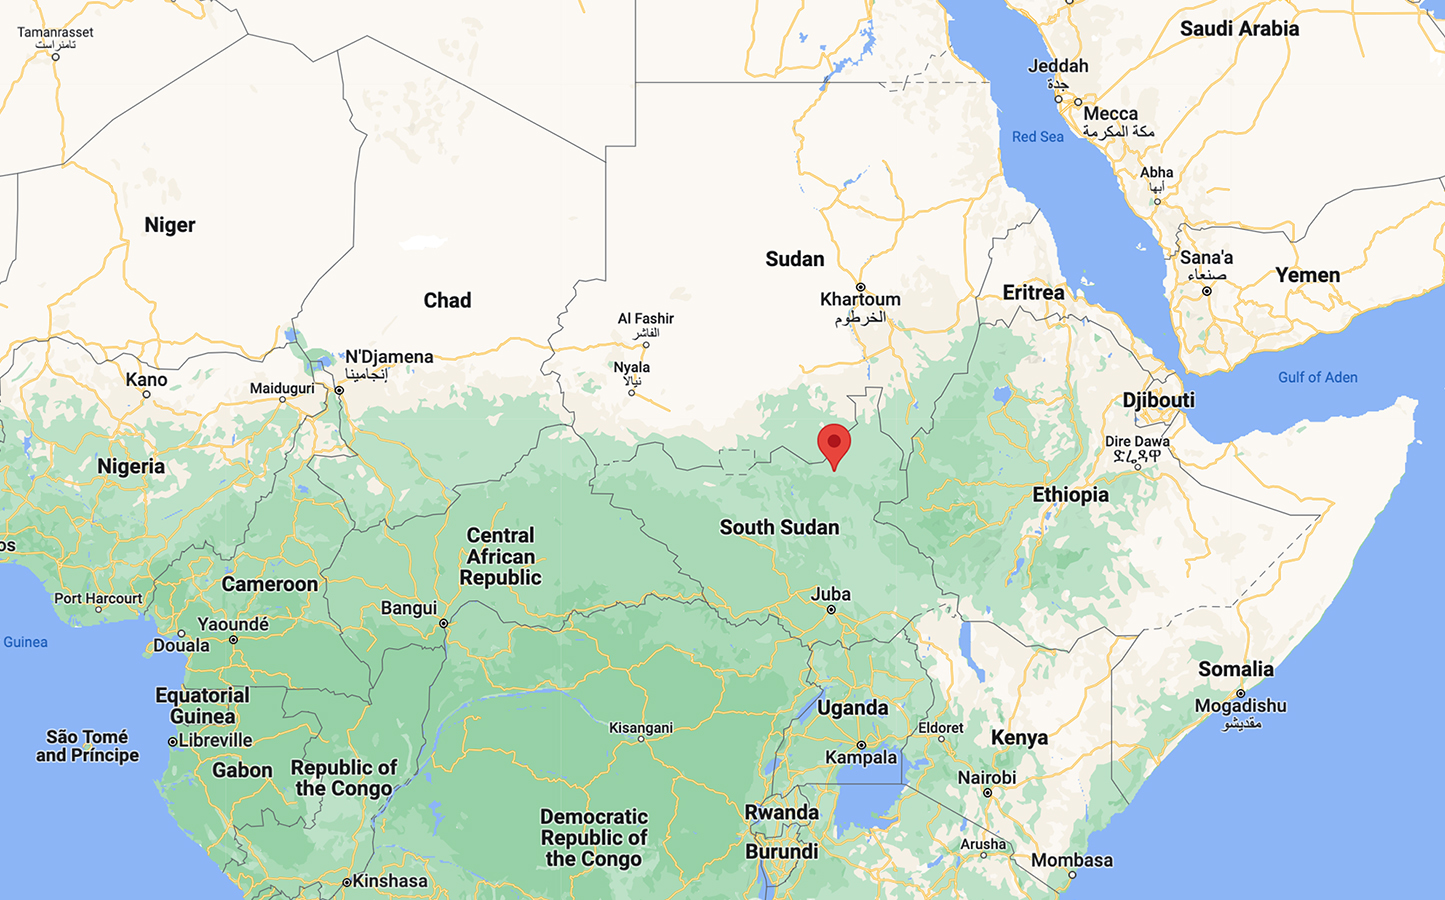 Malakal, red, in northern South Sudan. Image courtesy Google Maps